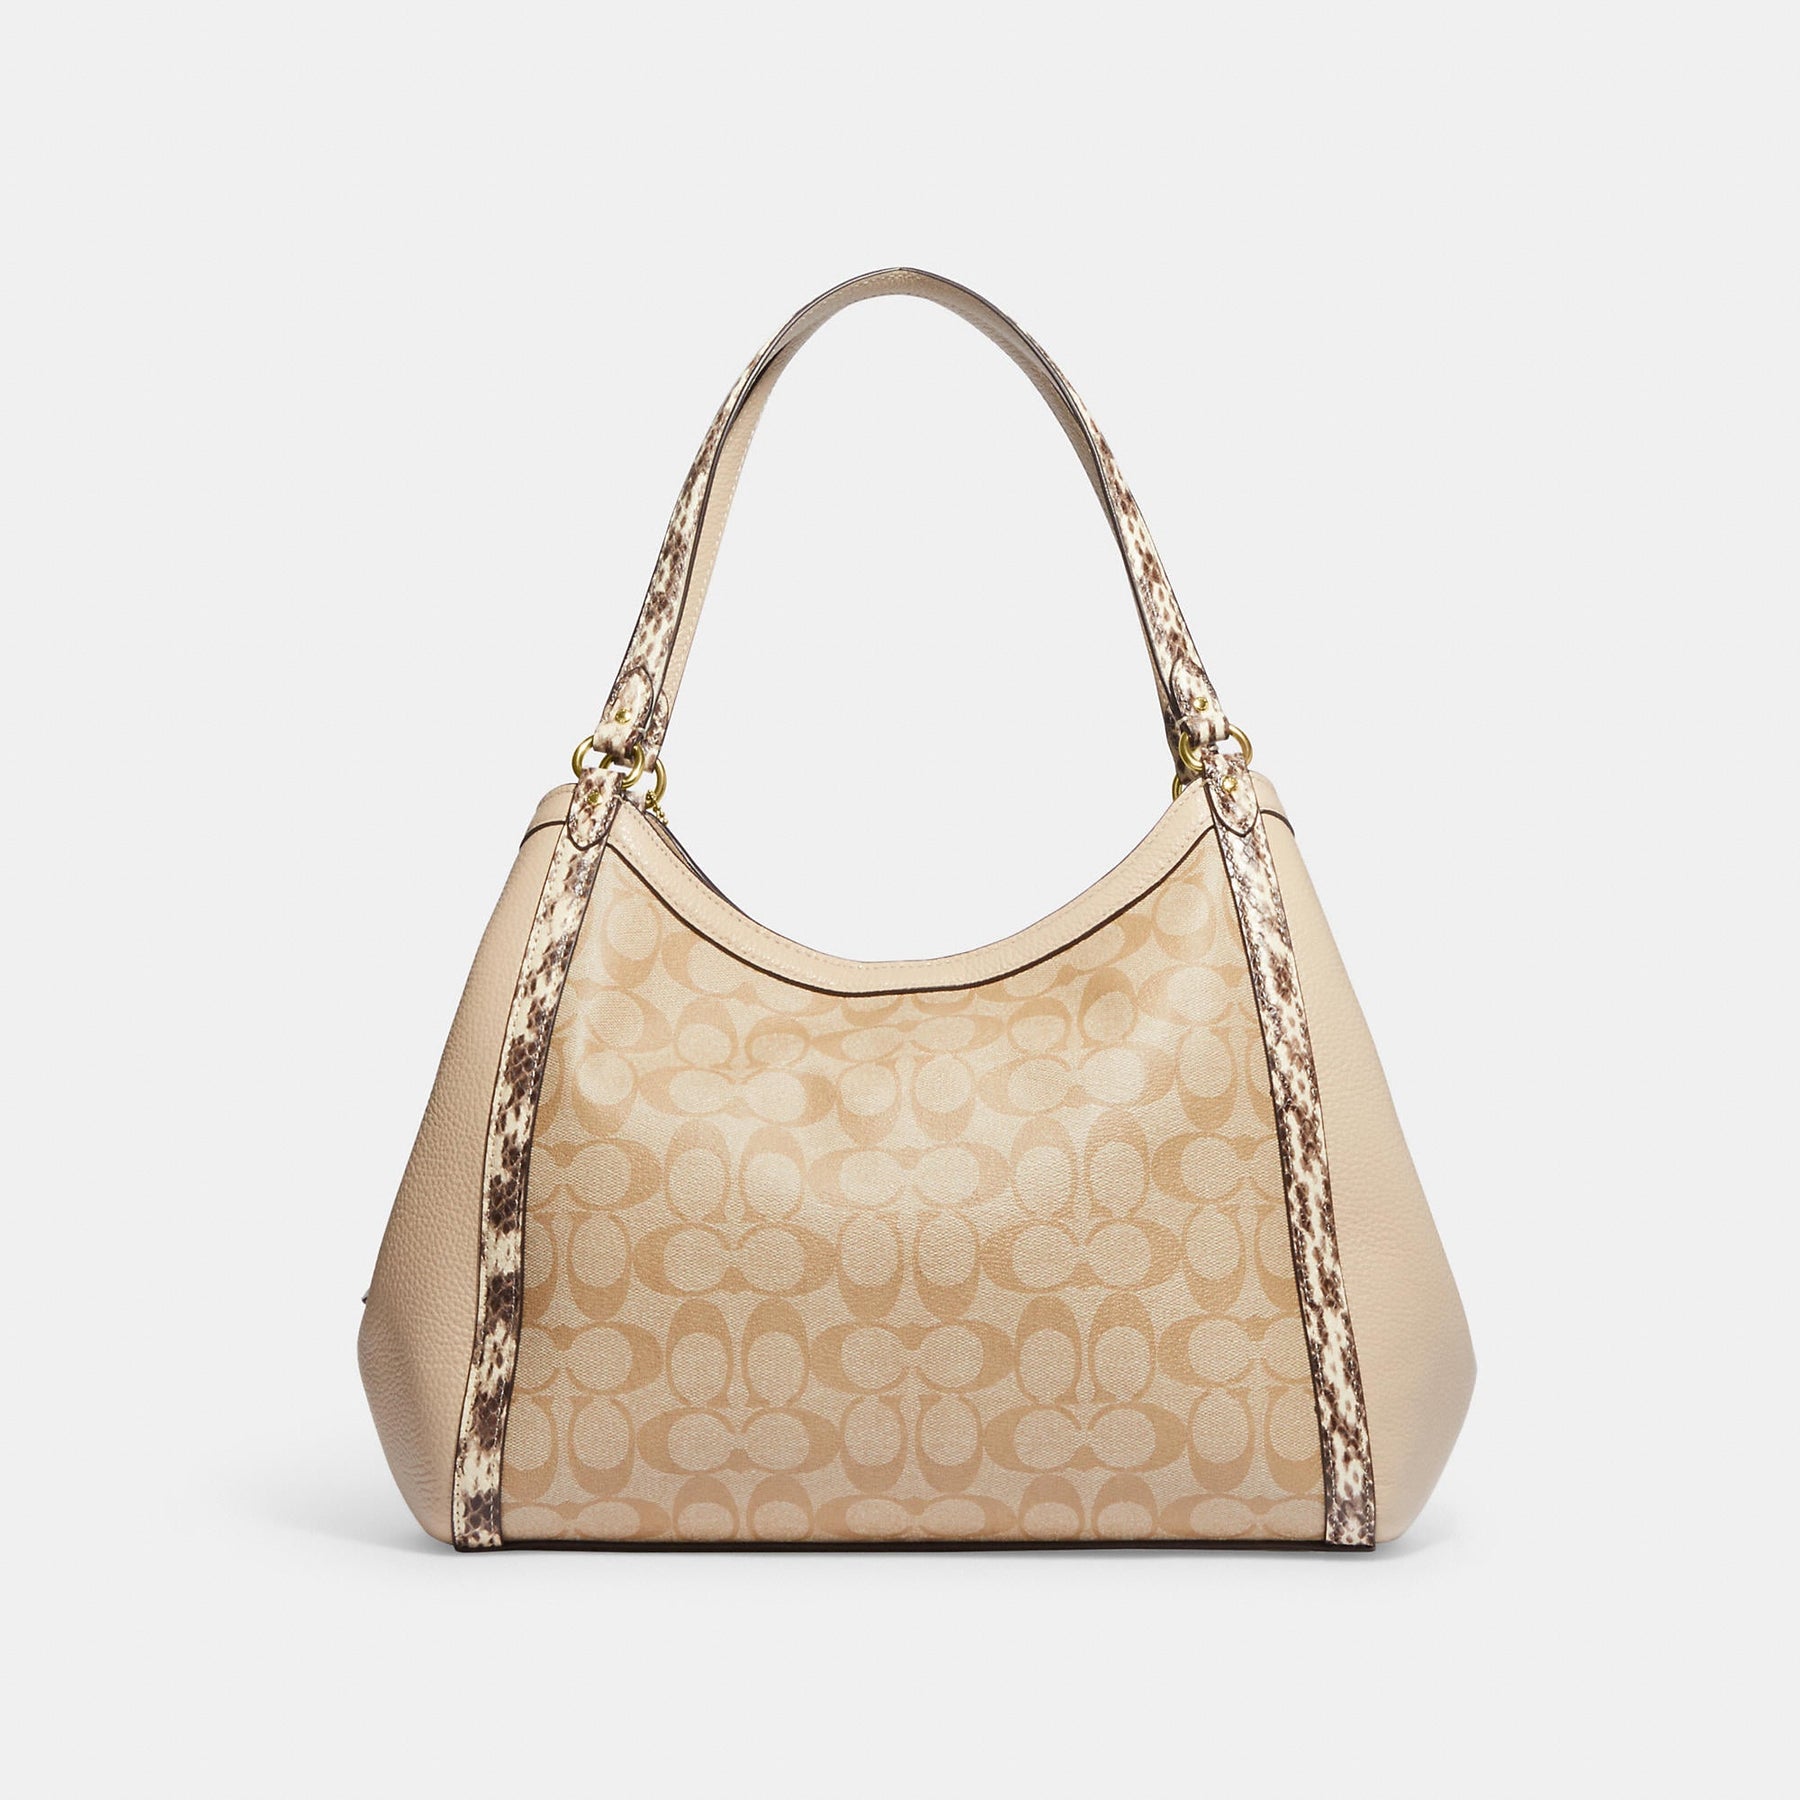 Coach Outlet Chain Kristy Shoulder Bag In Signature Canvas in Natural